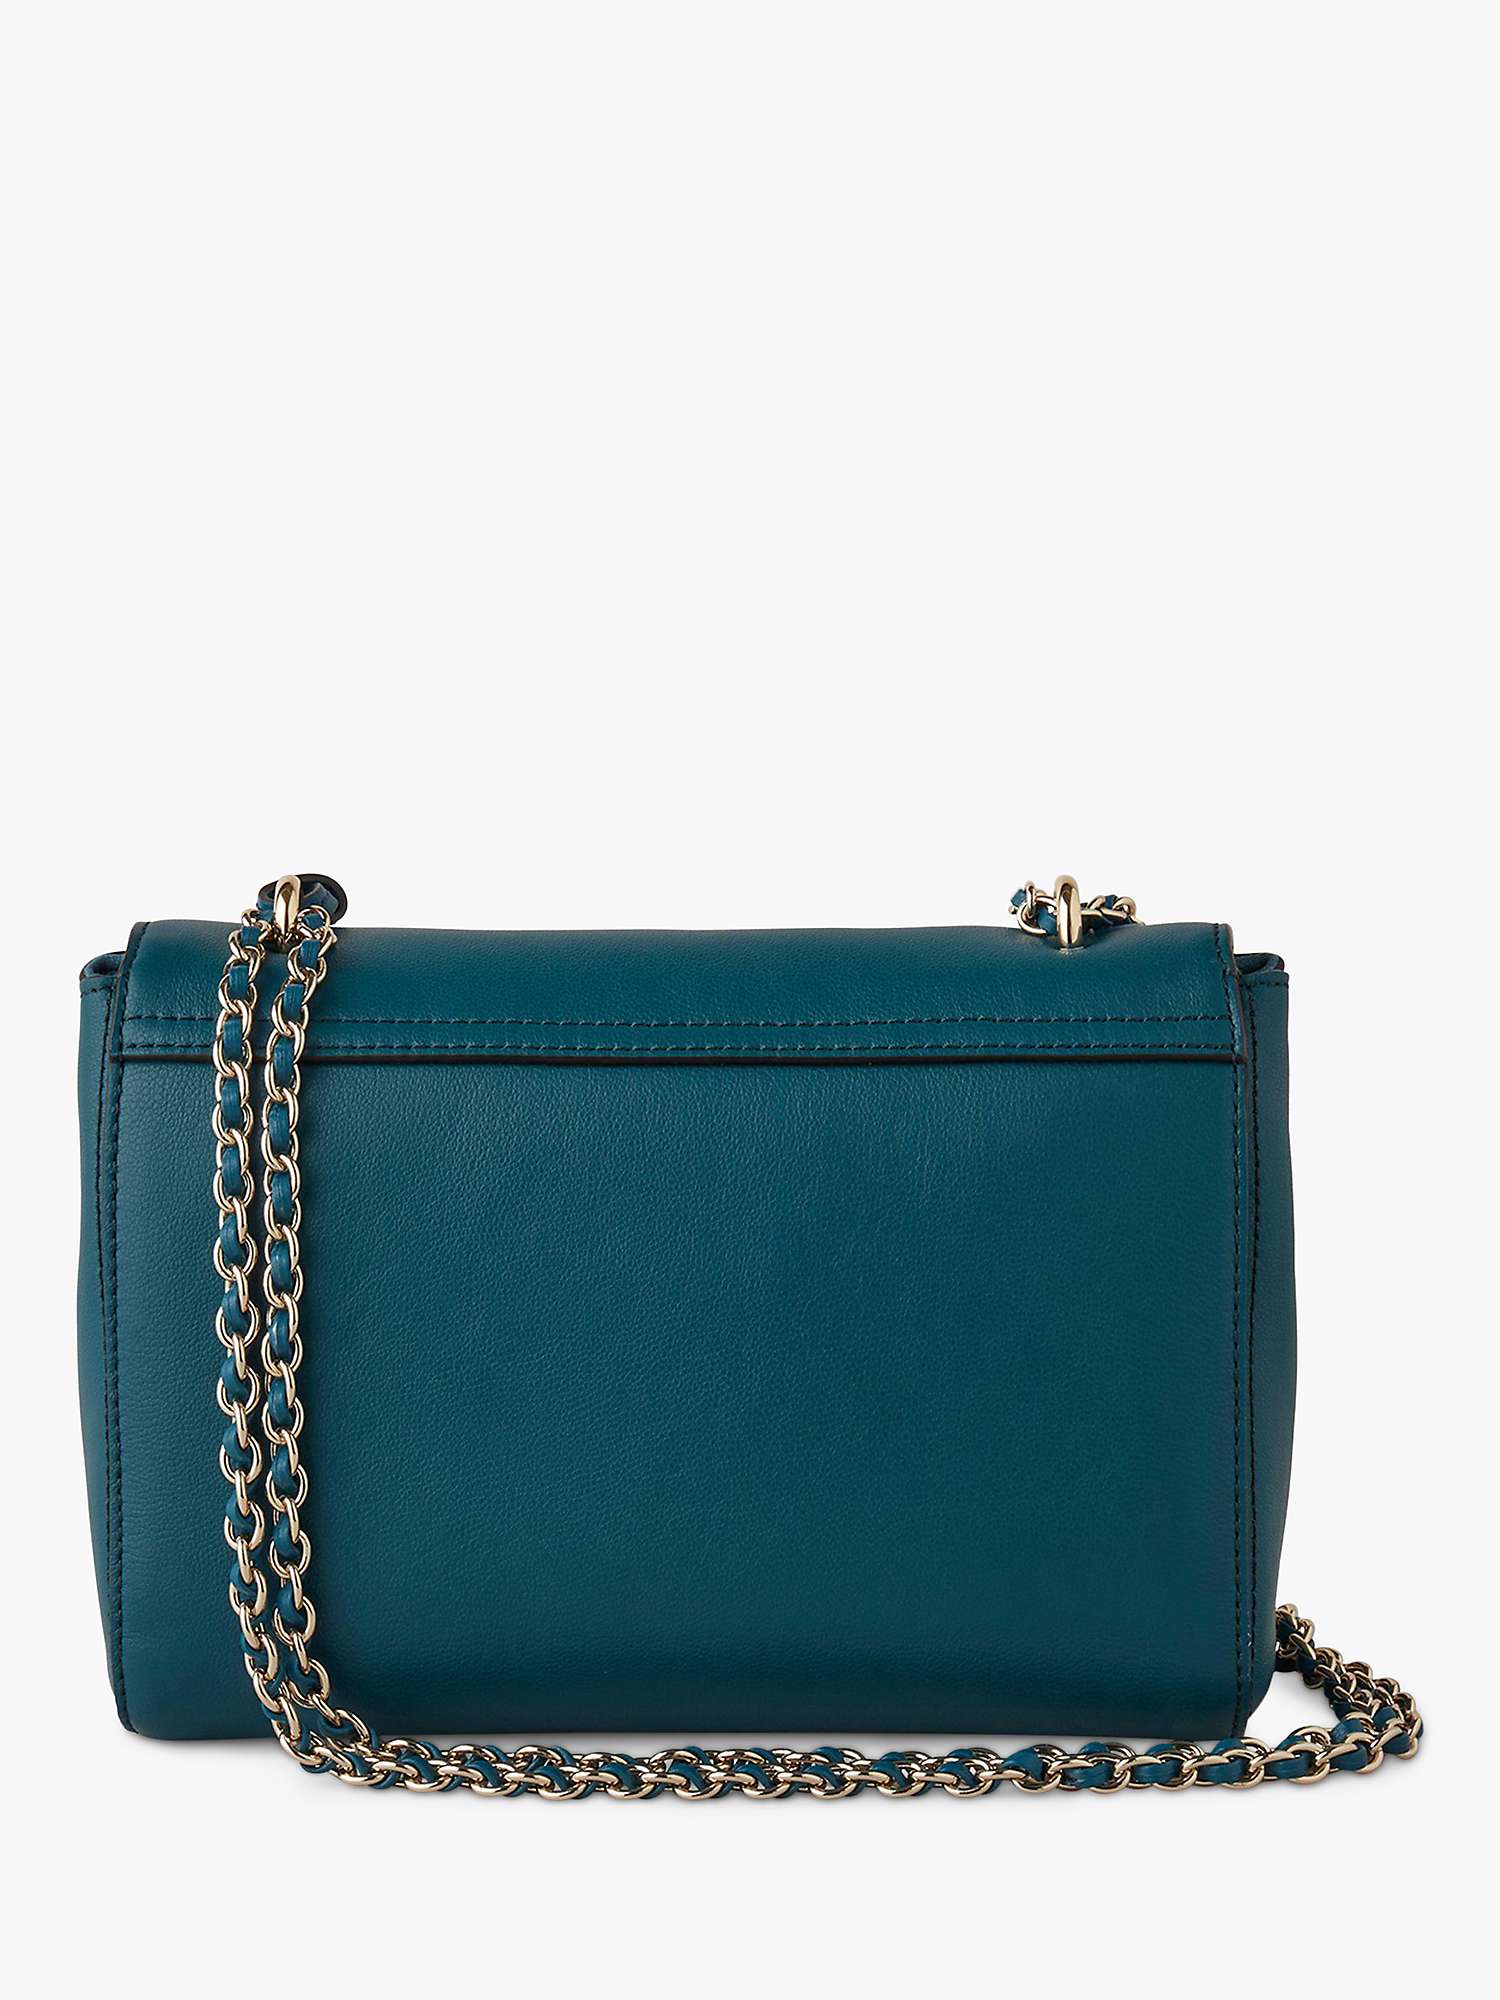 Buy Mulberry Lily Micro Classic Grain Leather Shoulder Bag Online at johnlewis.com